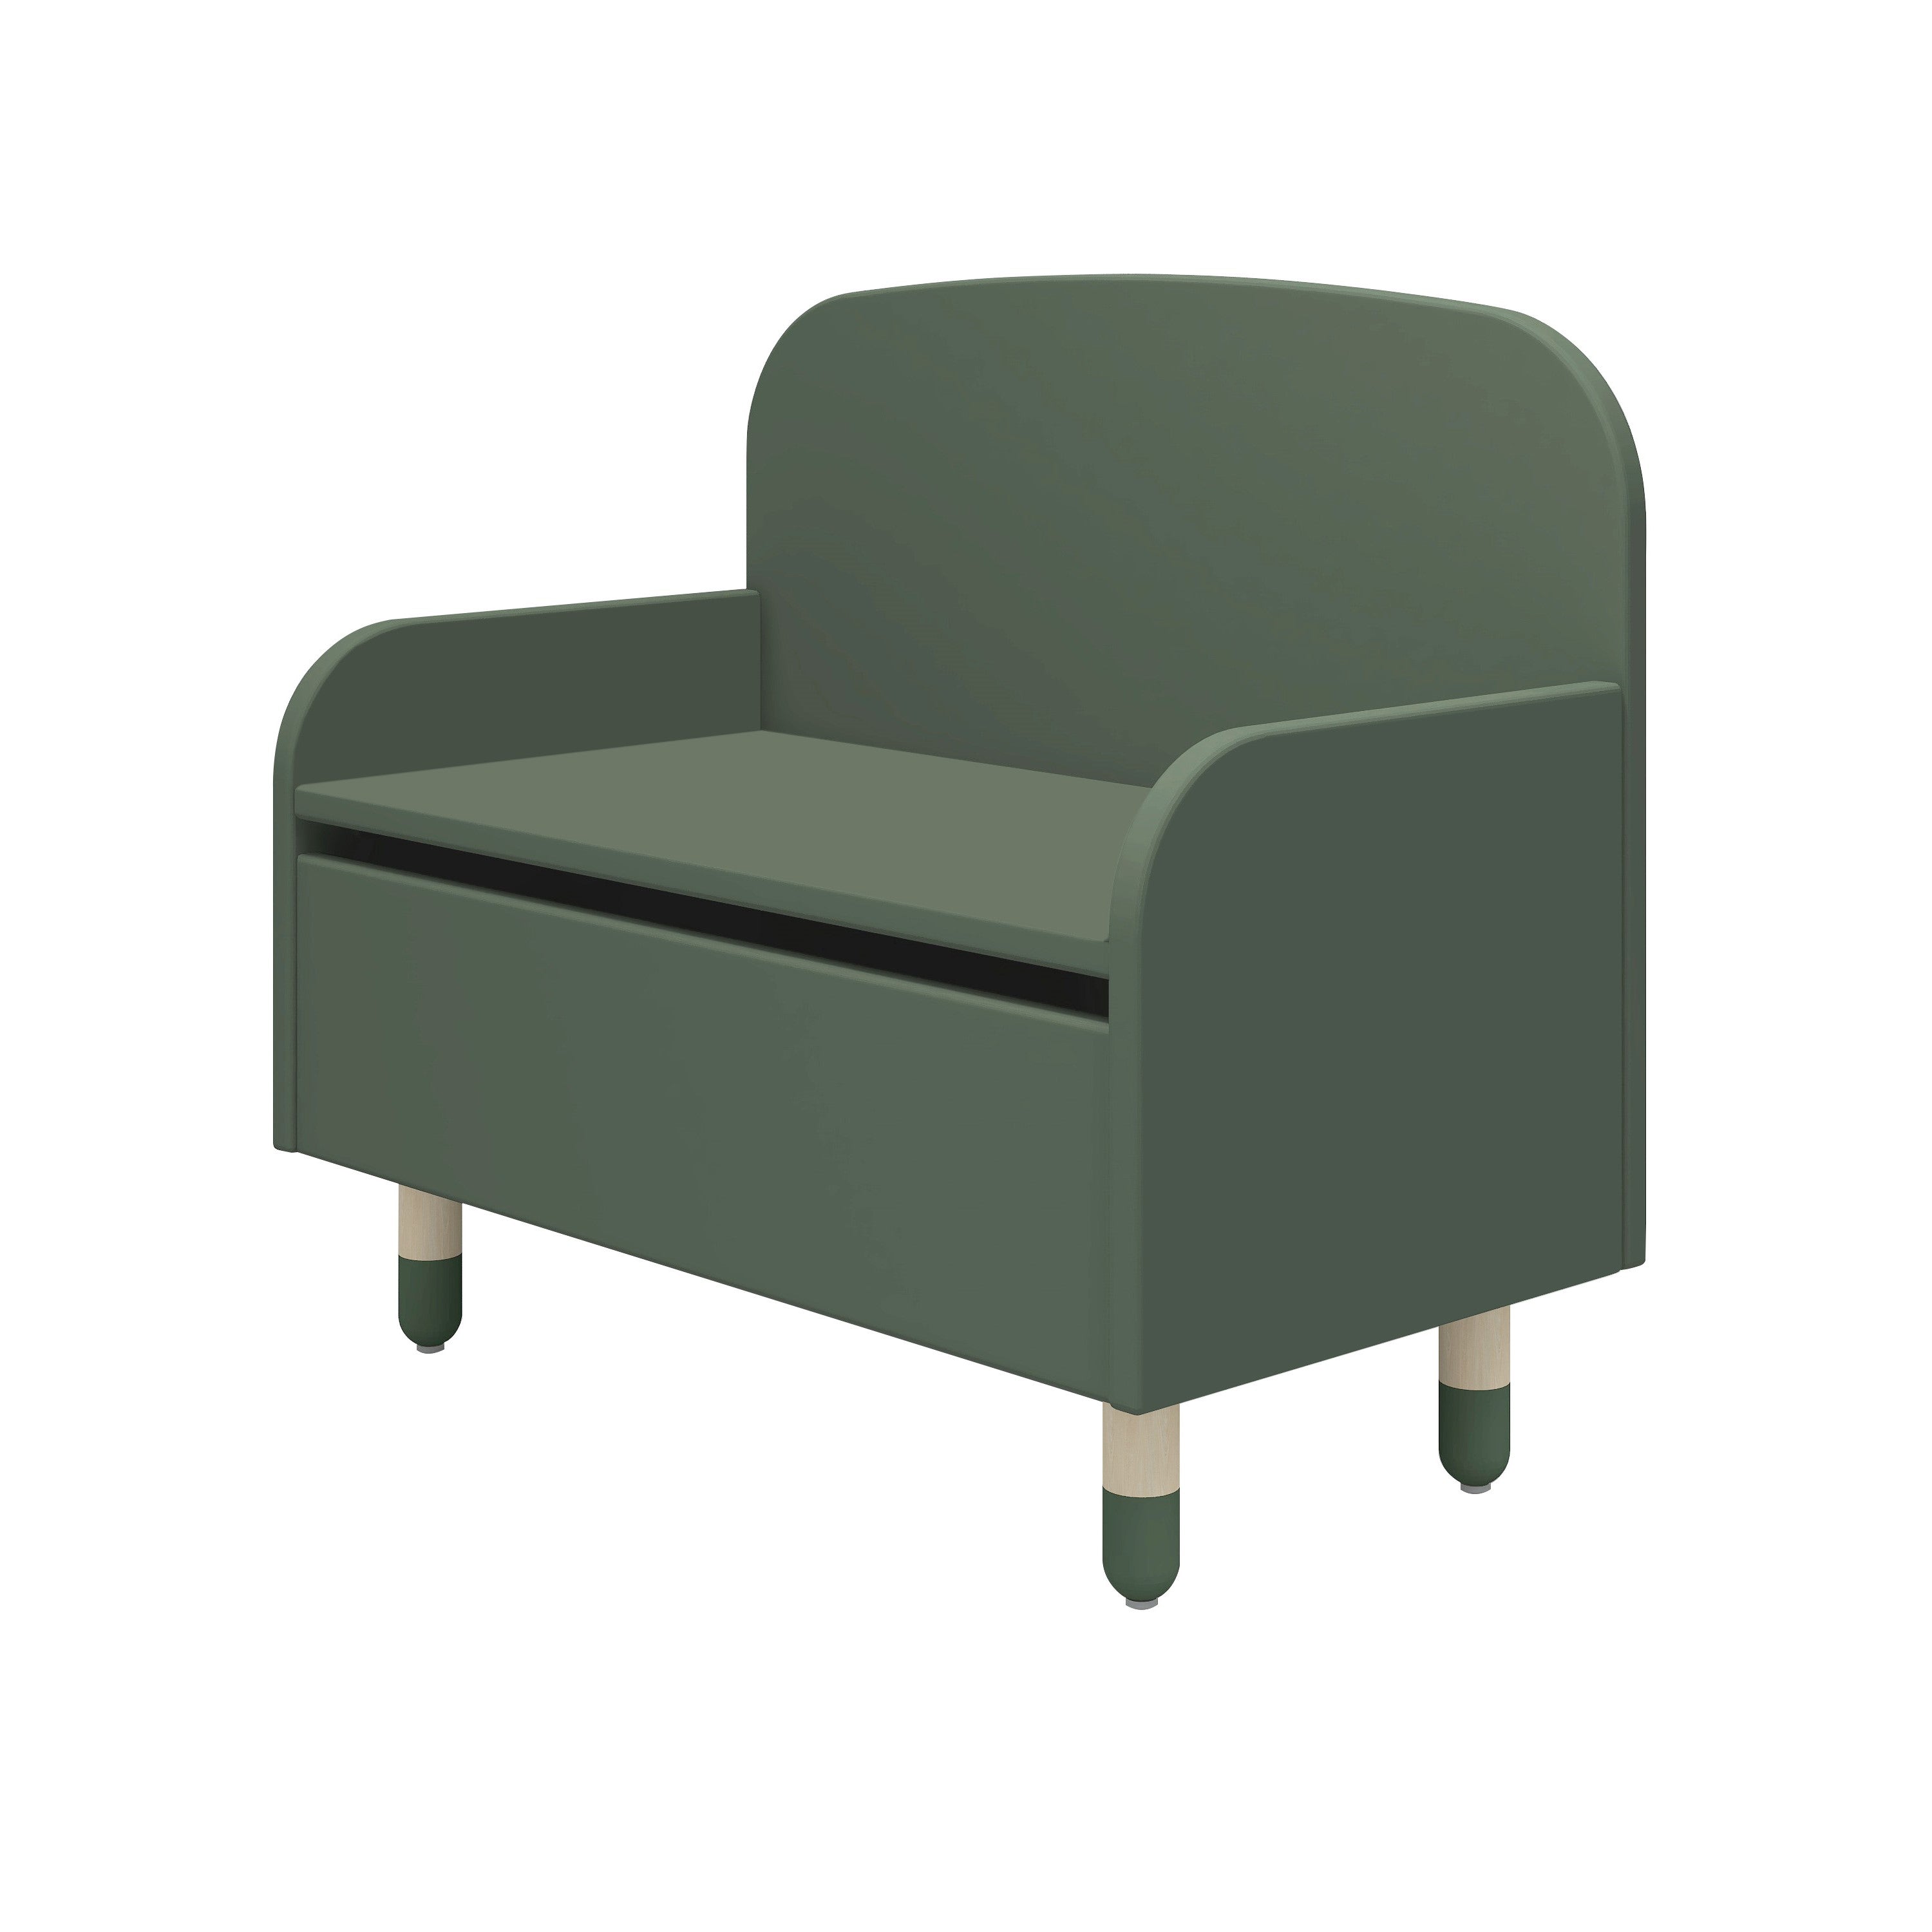 Flexa Dots Storage Bench with Back Rest in Deep Green